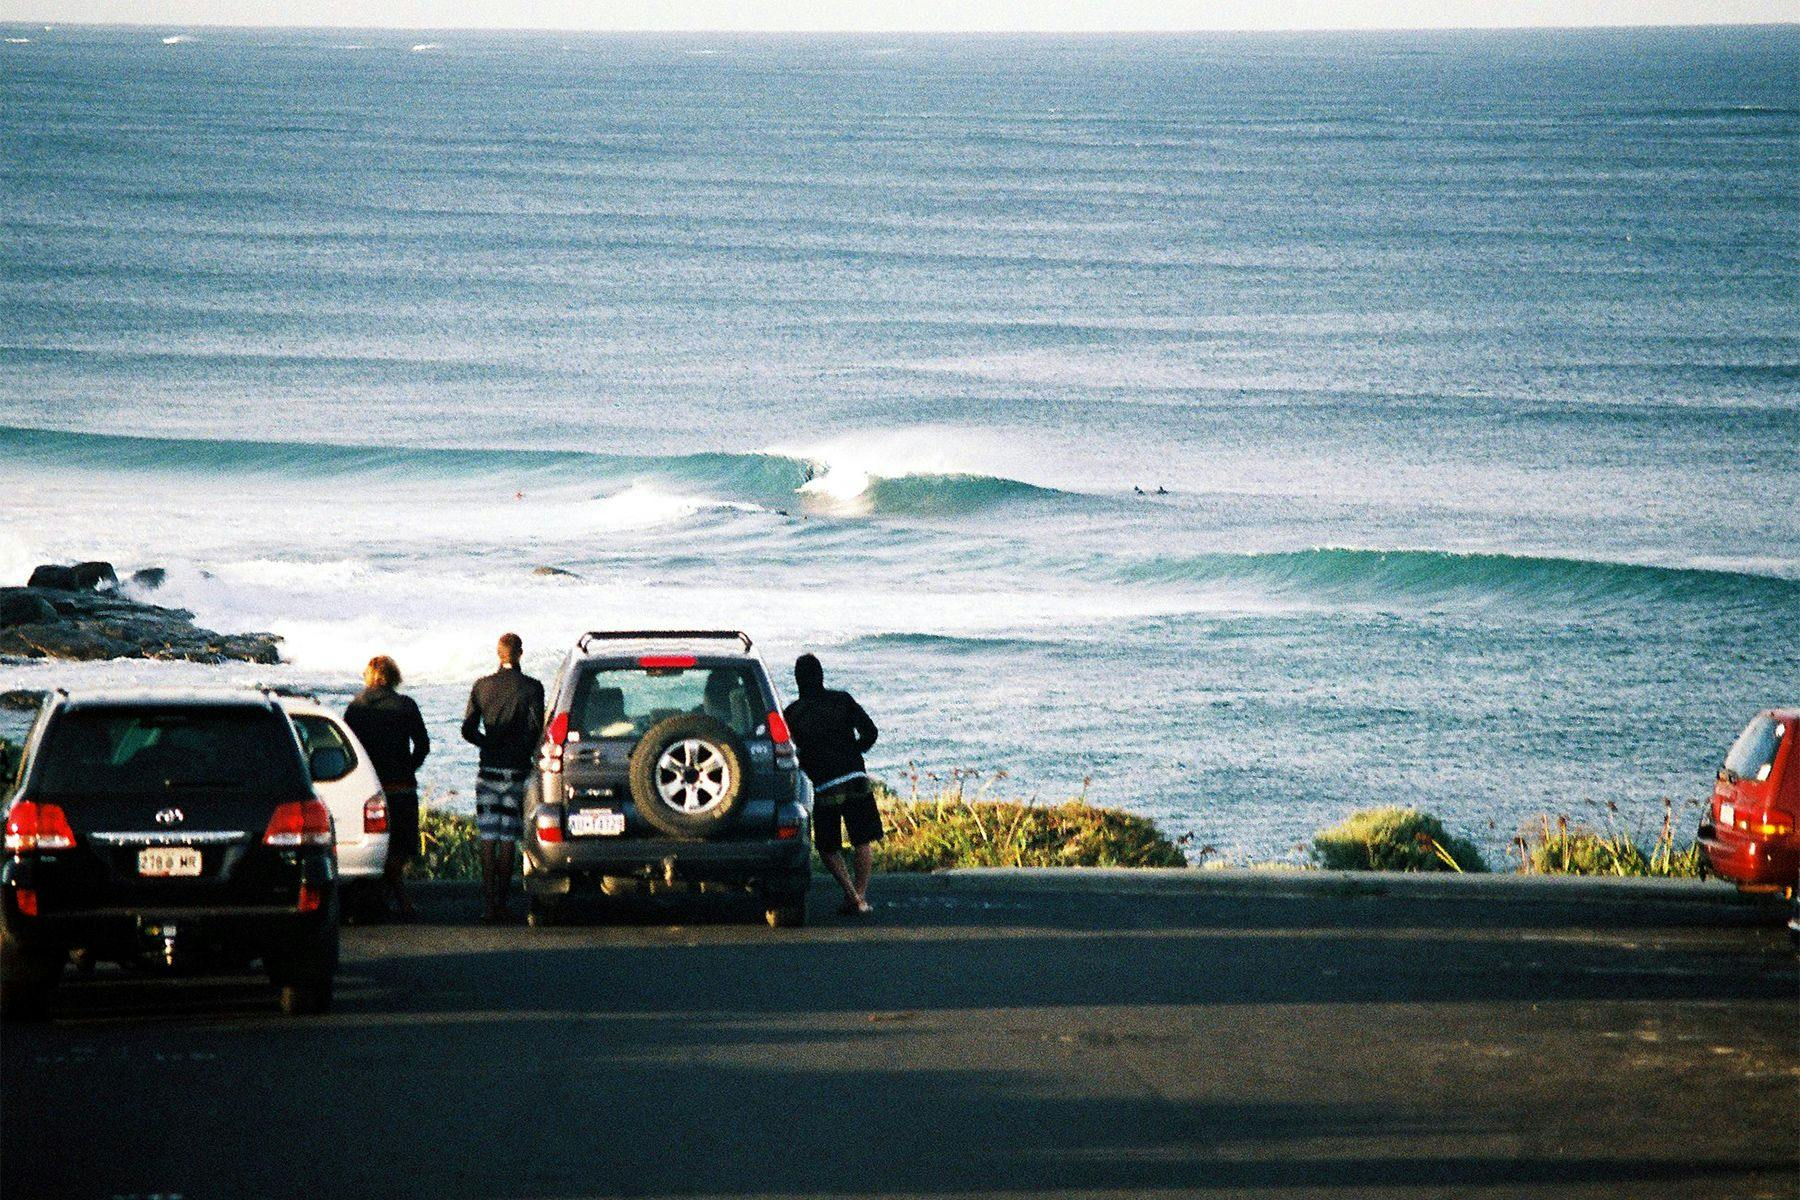 surfers leaning on a car in a car park watching the waves